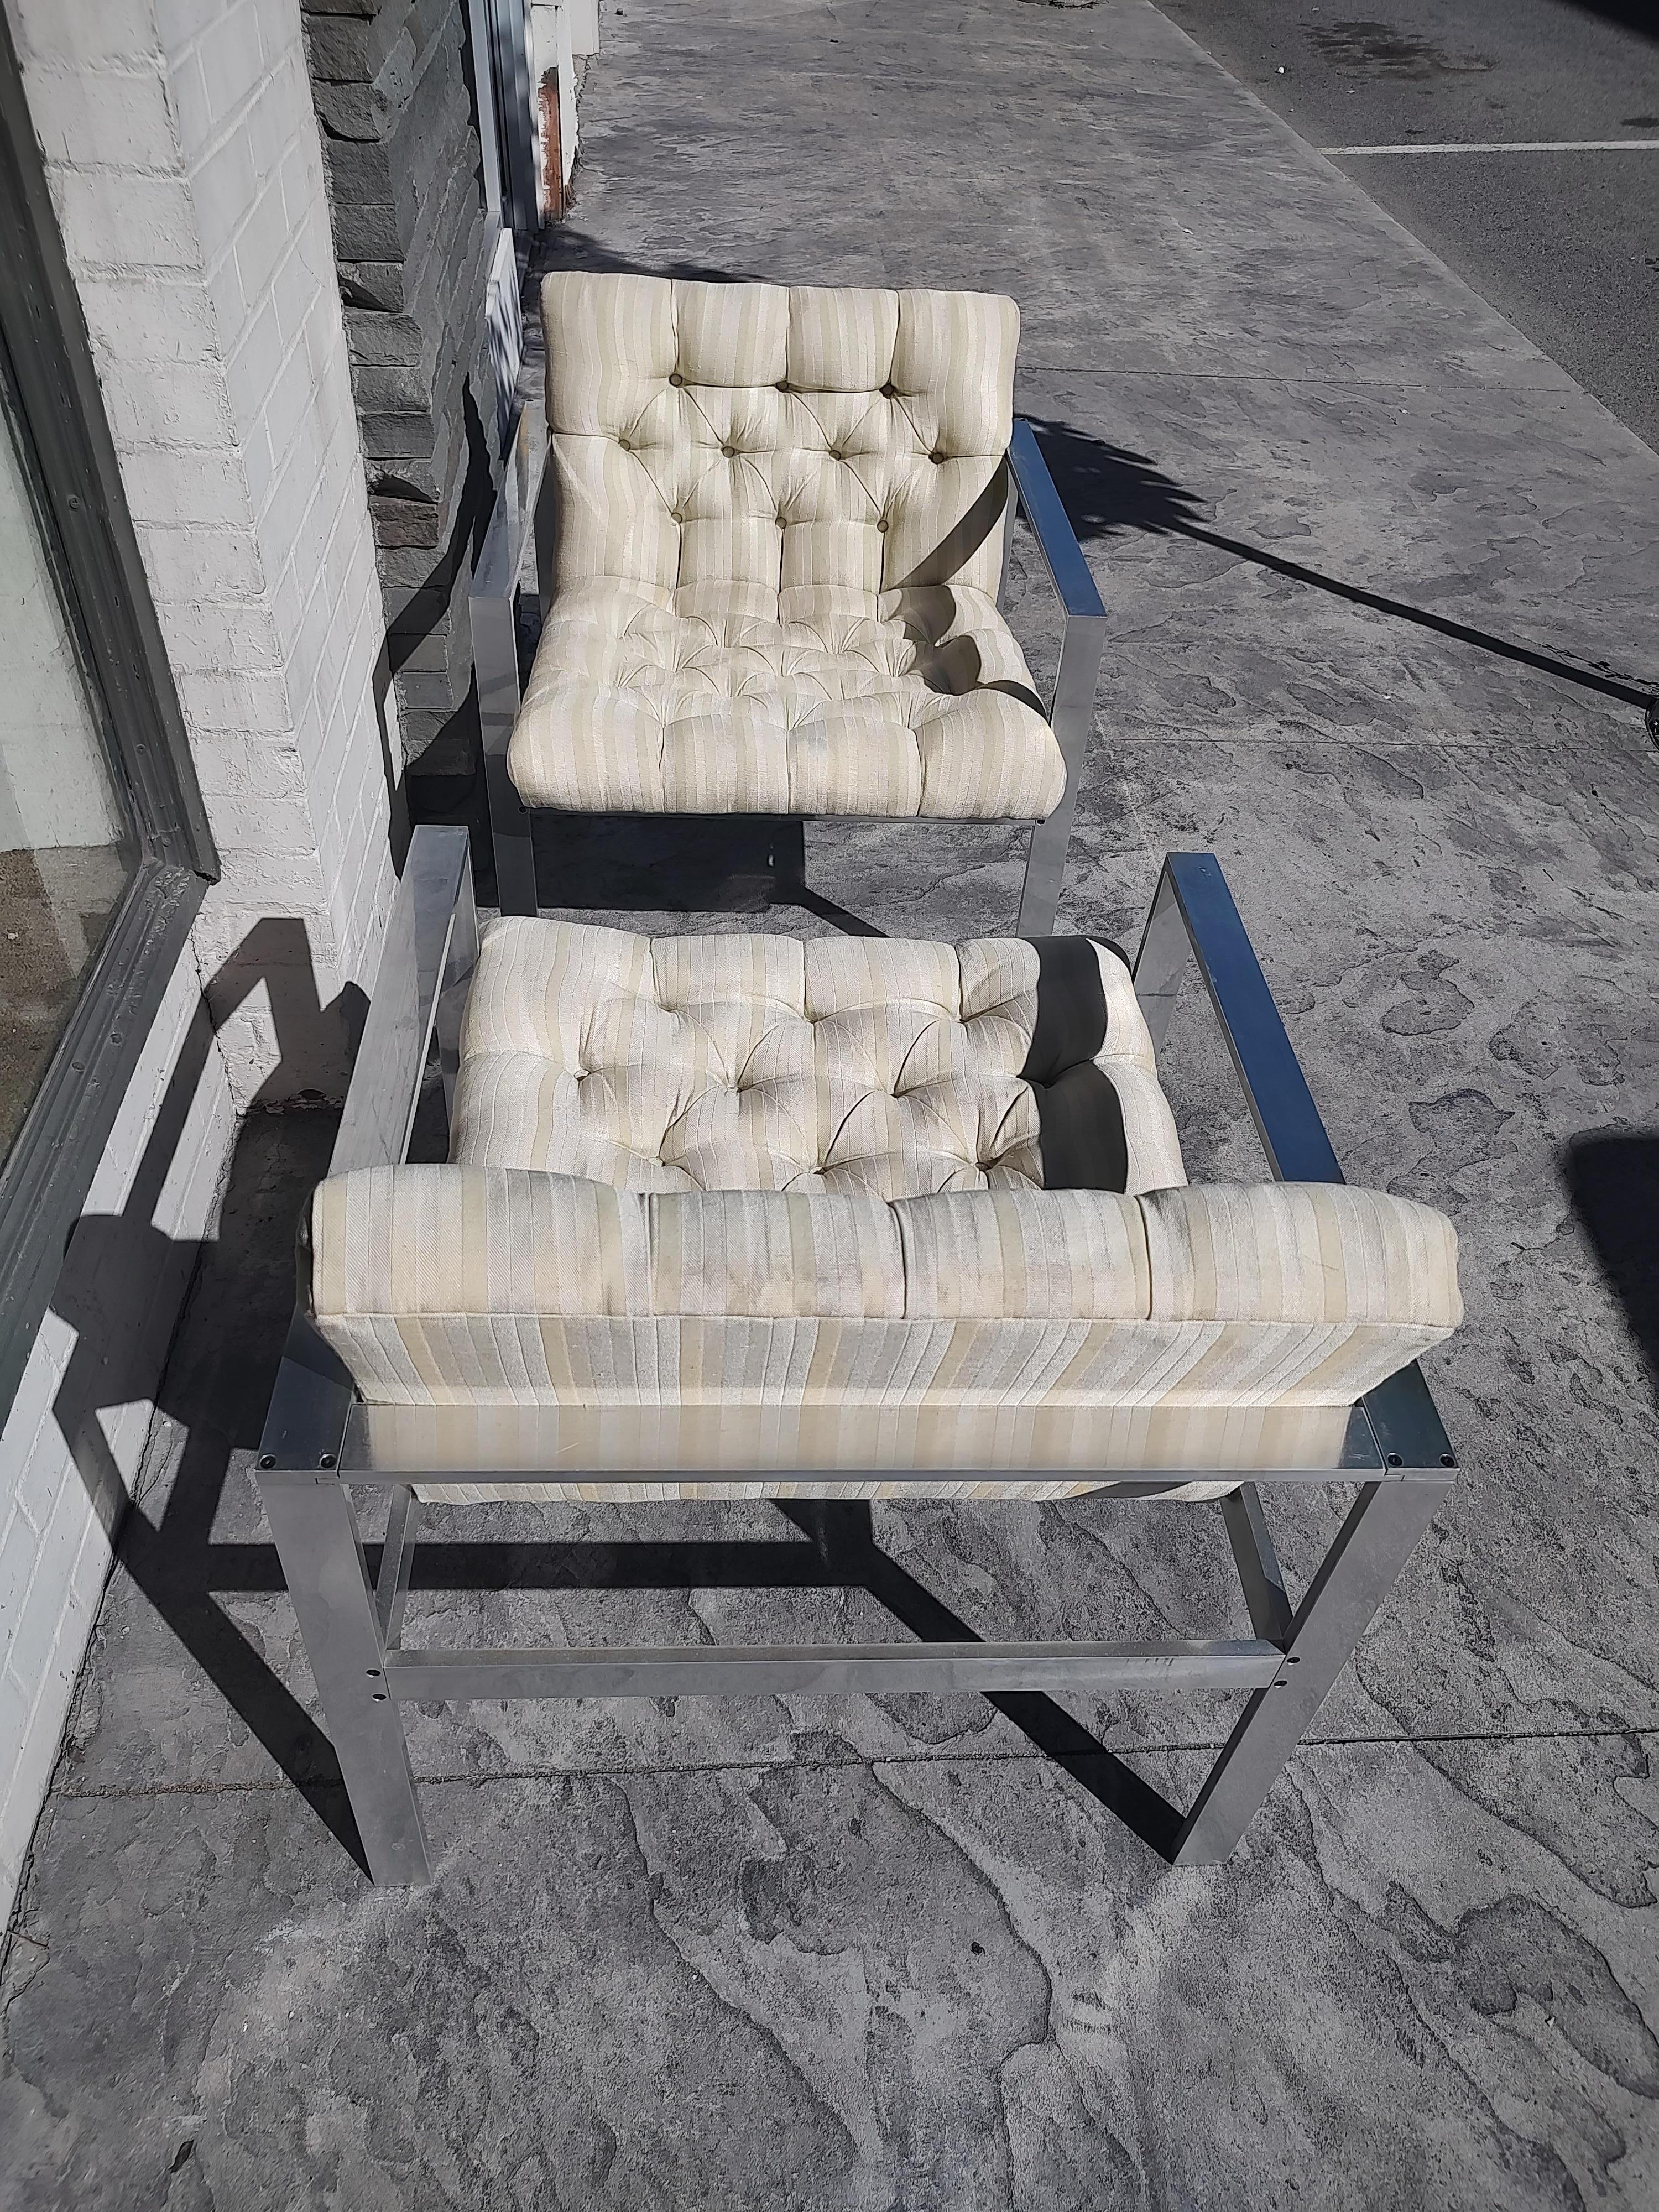 Pair of Mid-Century Modern Tufted Aluminum Lounge Chairs by Harvey Probber In Good Condition For Sale In Port Jervis, NY